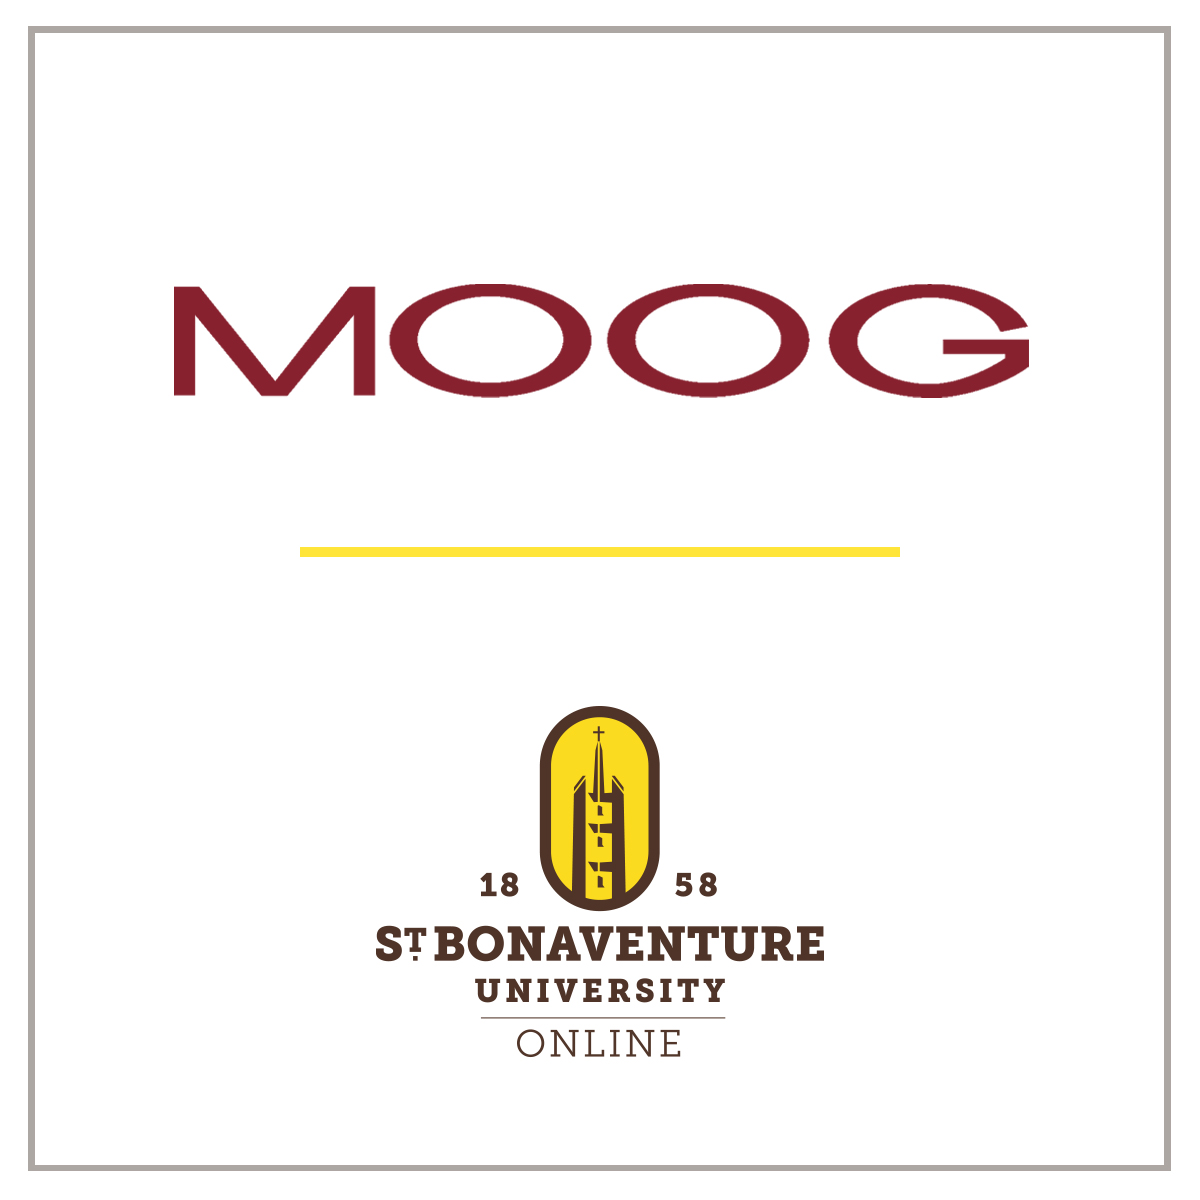 Great news! We have partnered with Moog to offer their employees and spouses a 15% discount on select online master's degree programs. Lifelong learning is key to staying ahead in today's competitive job market. To learn more, visit brnw.ch/21wJZAB